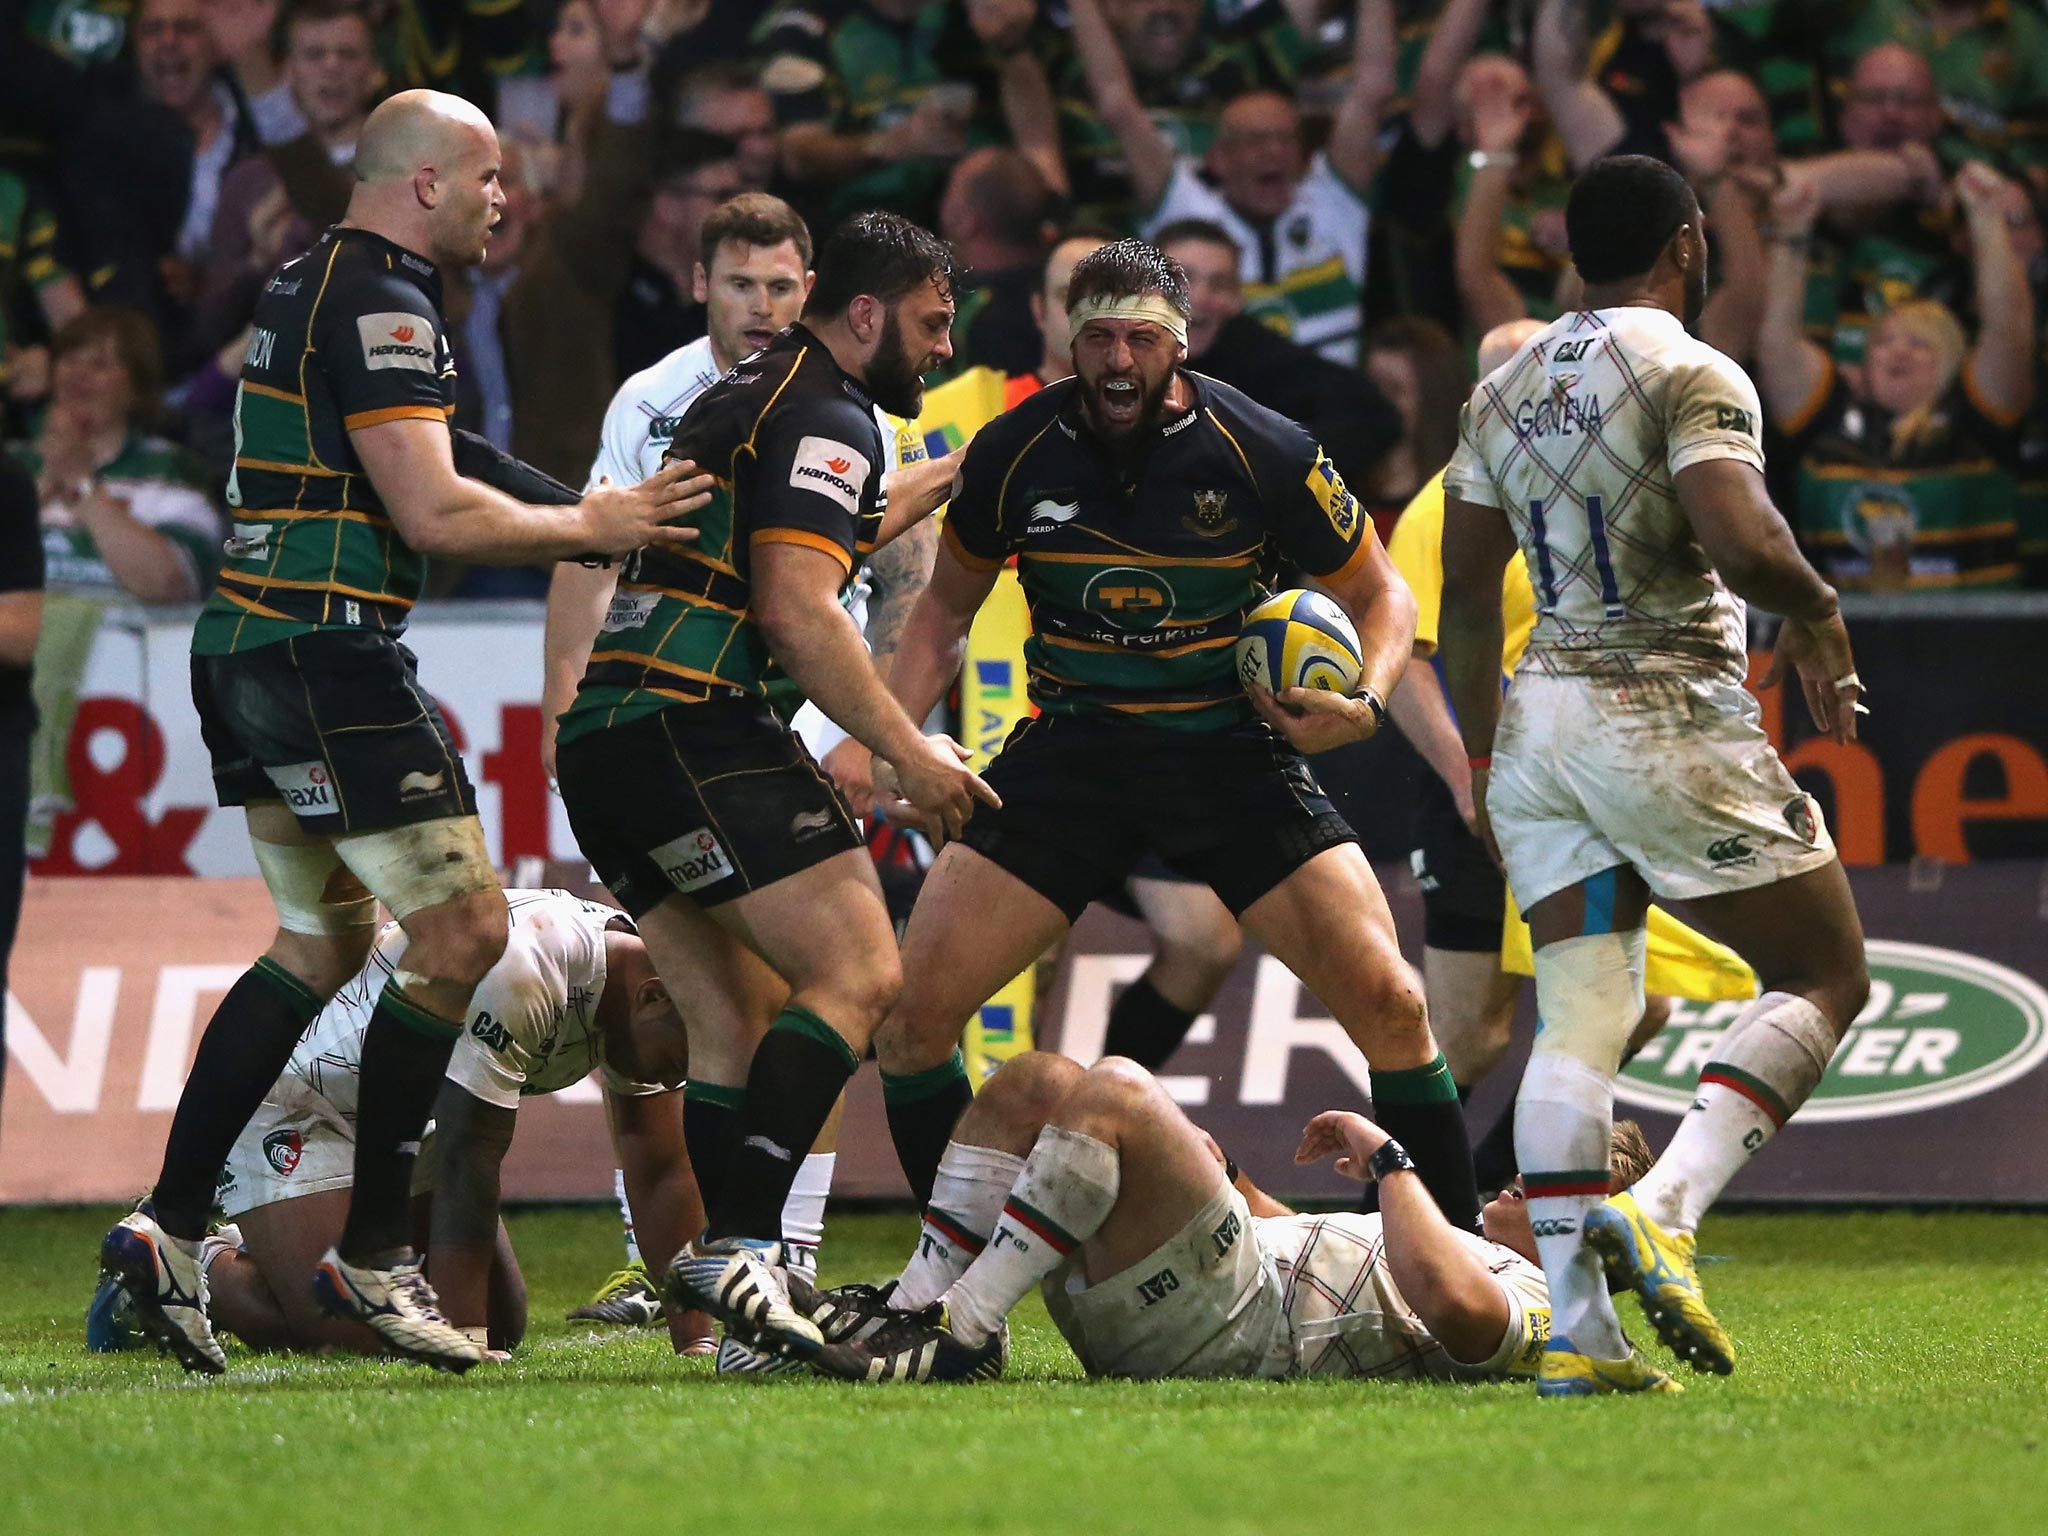 Tom Wood roars his delight after claiming the match-winning try last night